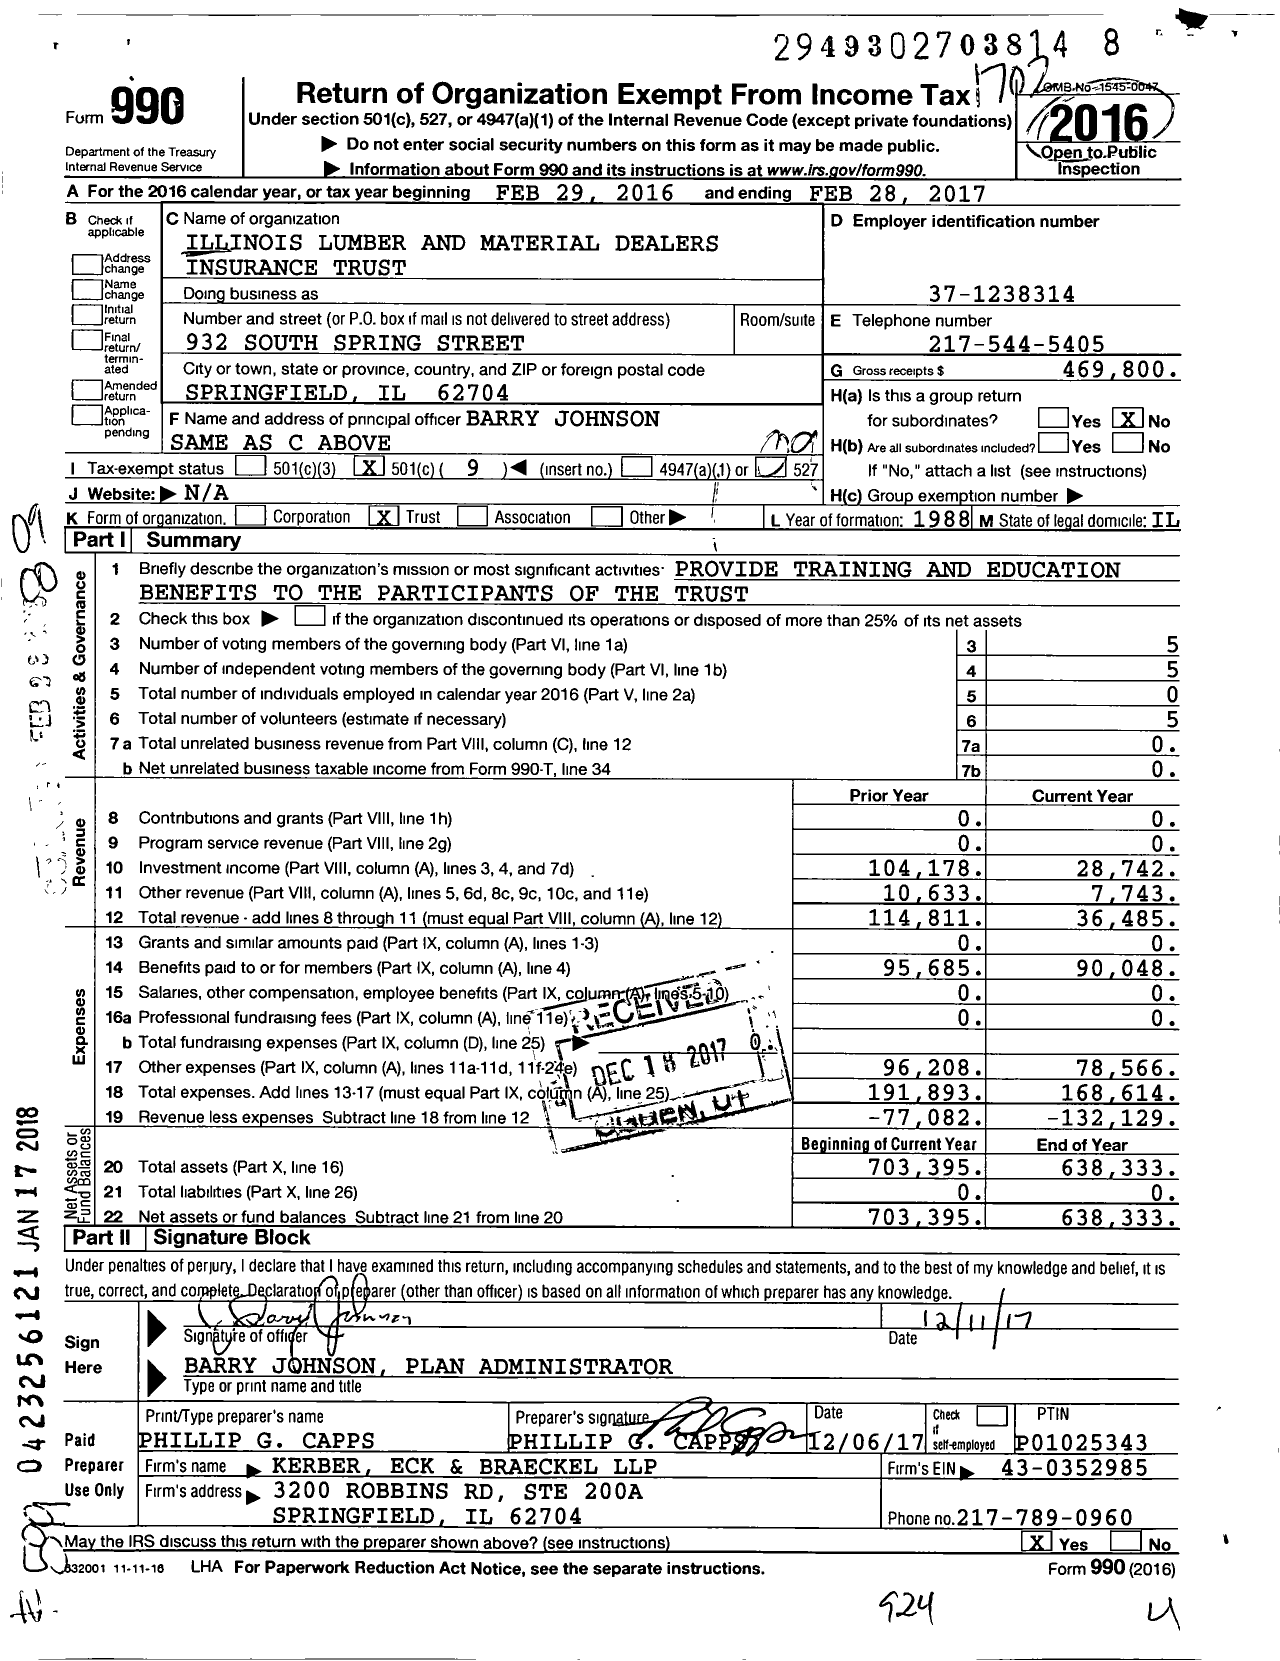 Image of first page of 2016 Form 990O for Illinois Lumber and Material Dealers Insurance Trust